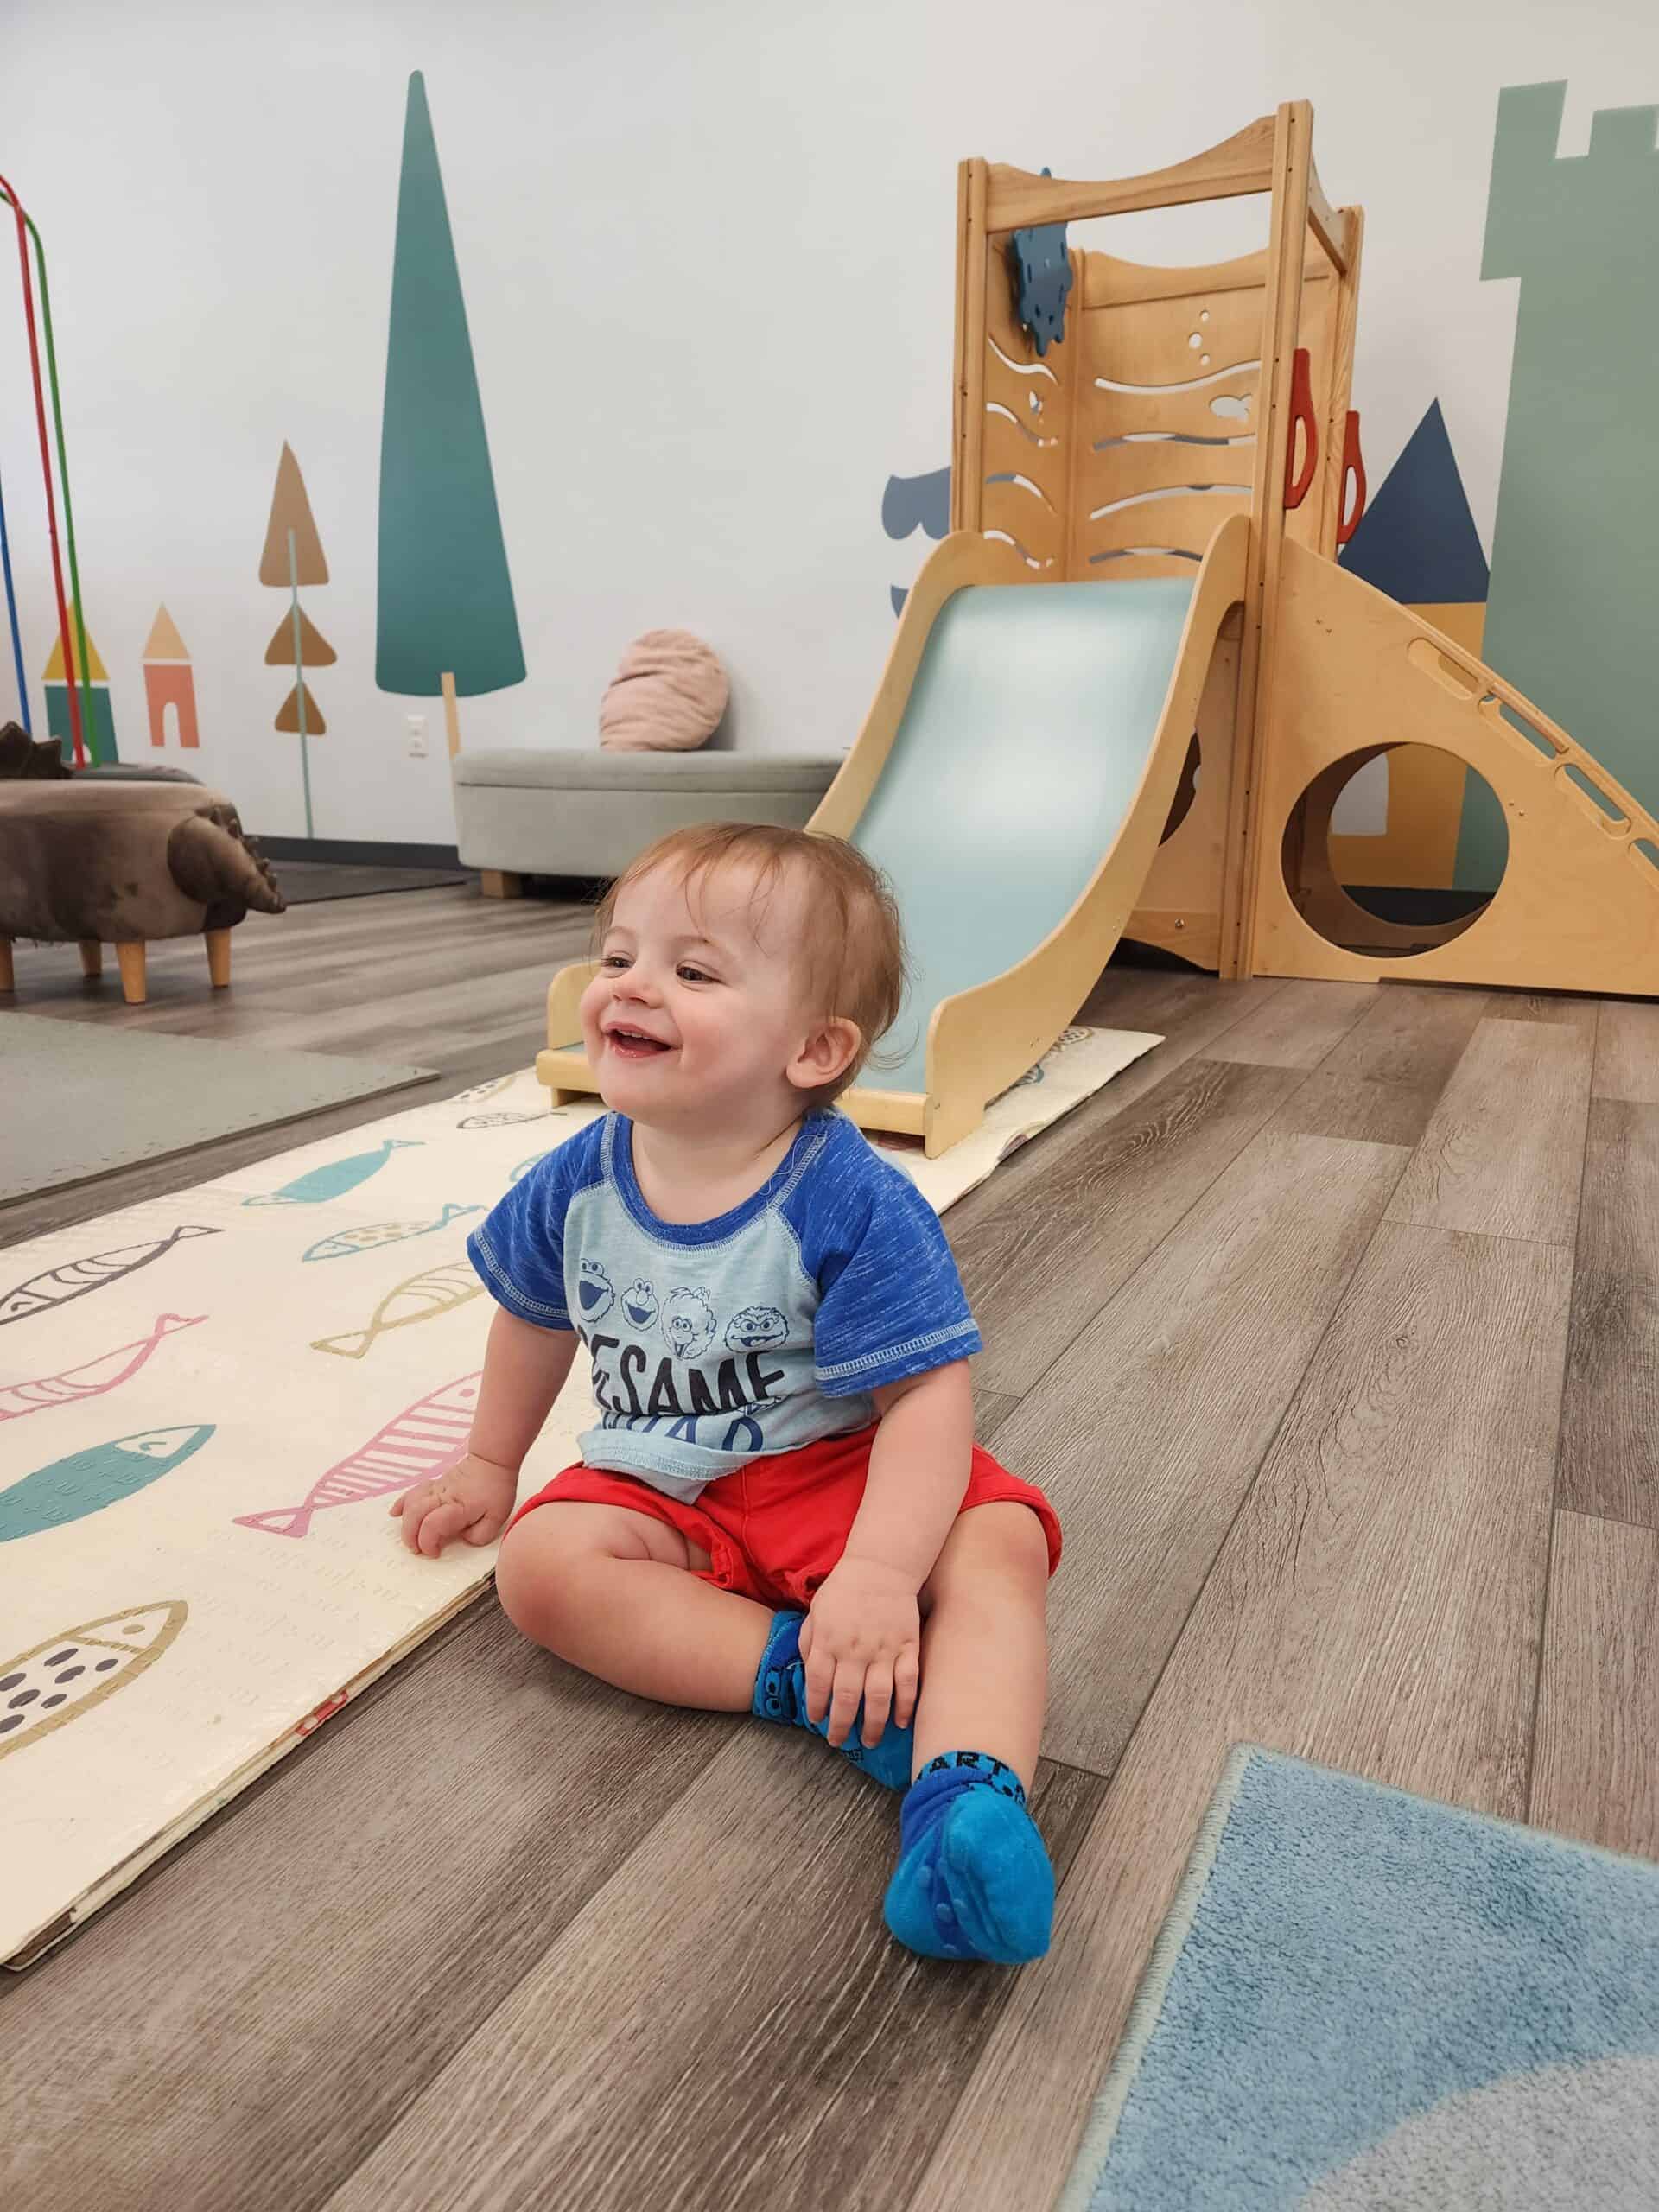 A cheerful toddler sits on the floor wearing a 'Sesame' graphic tee and red shorts, laughing in a serene indoor playroom in Raleigh, NC, with minimalist wooden play structures and soft, muted tones in the background.